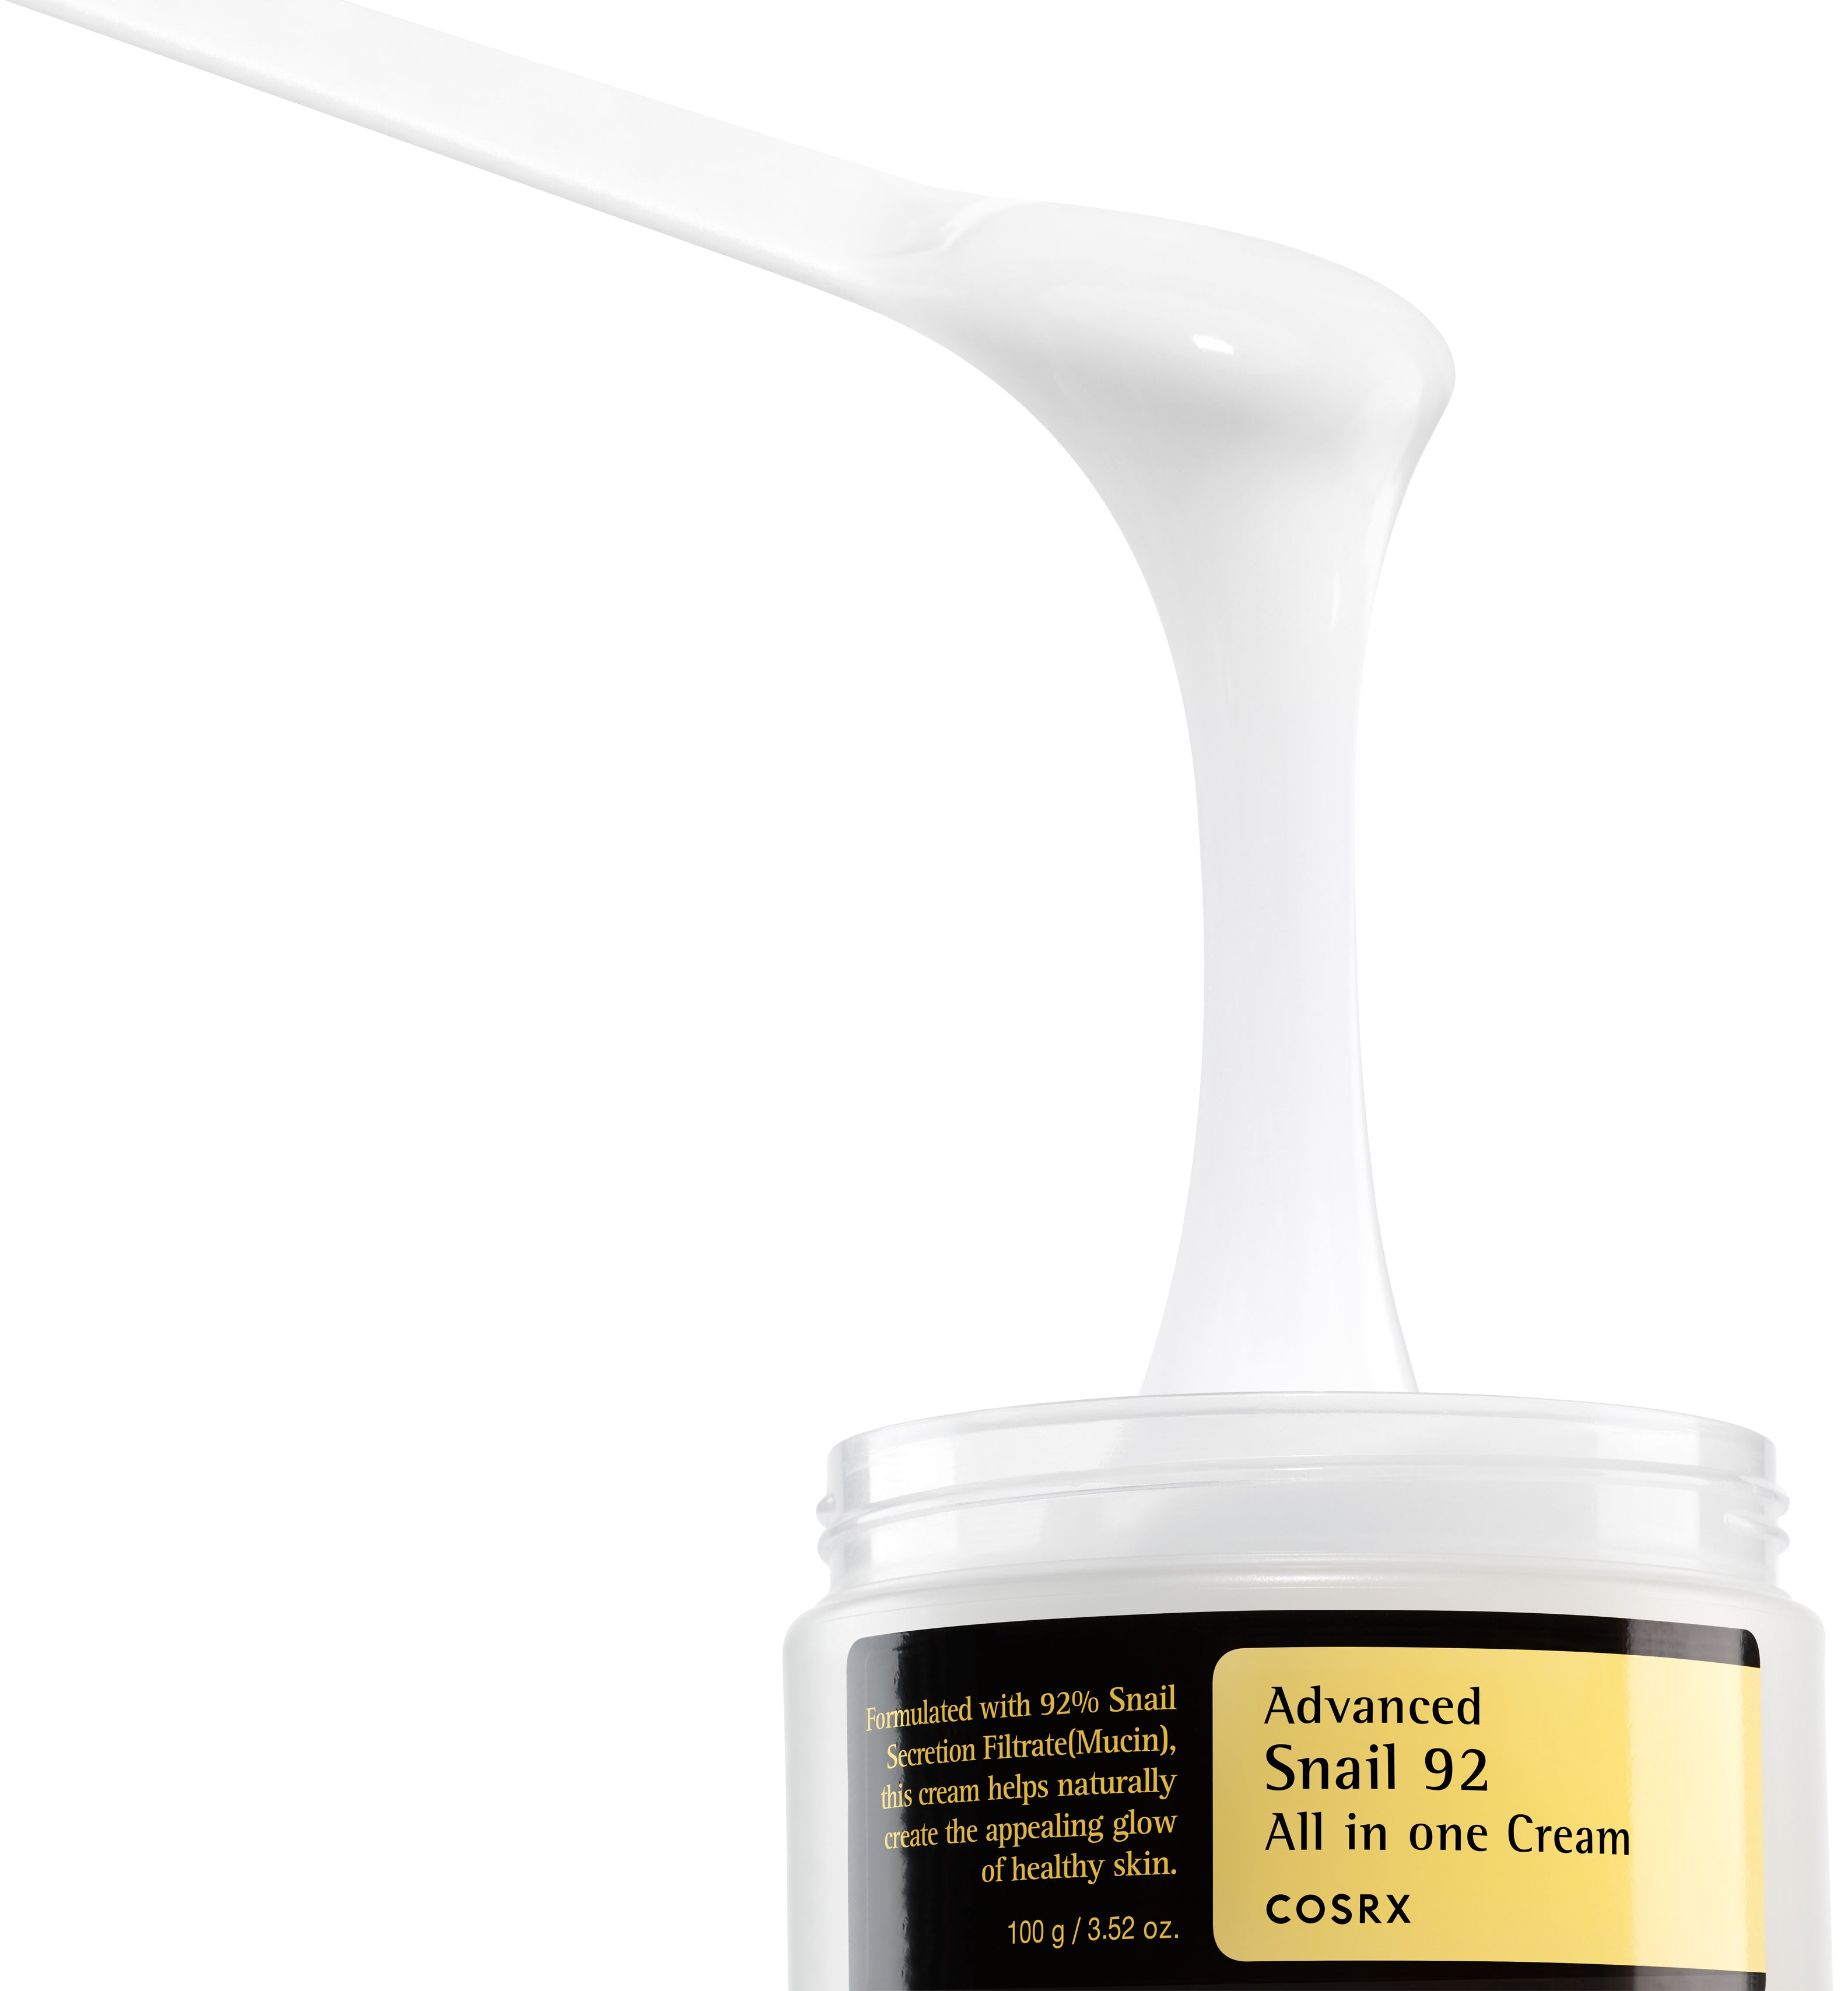 COSRX Advanced Snail 92 All in one Cream at Socialite Beauty Canada